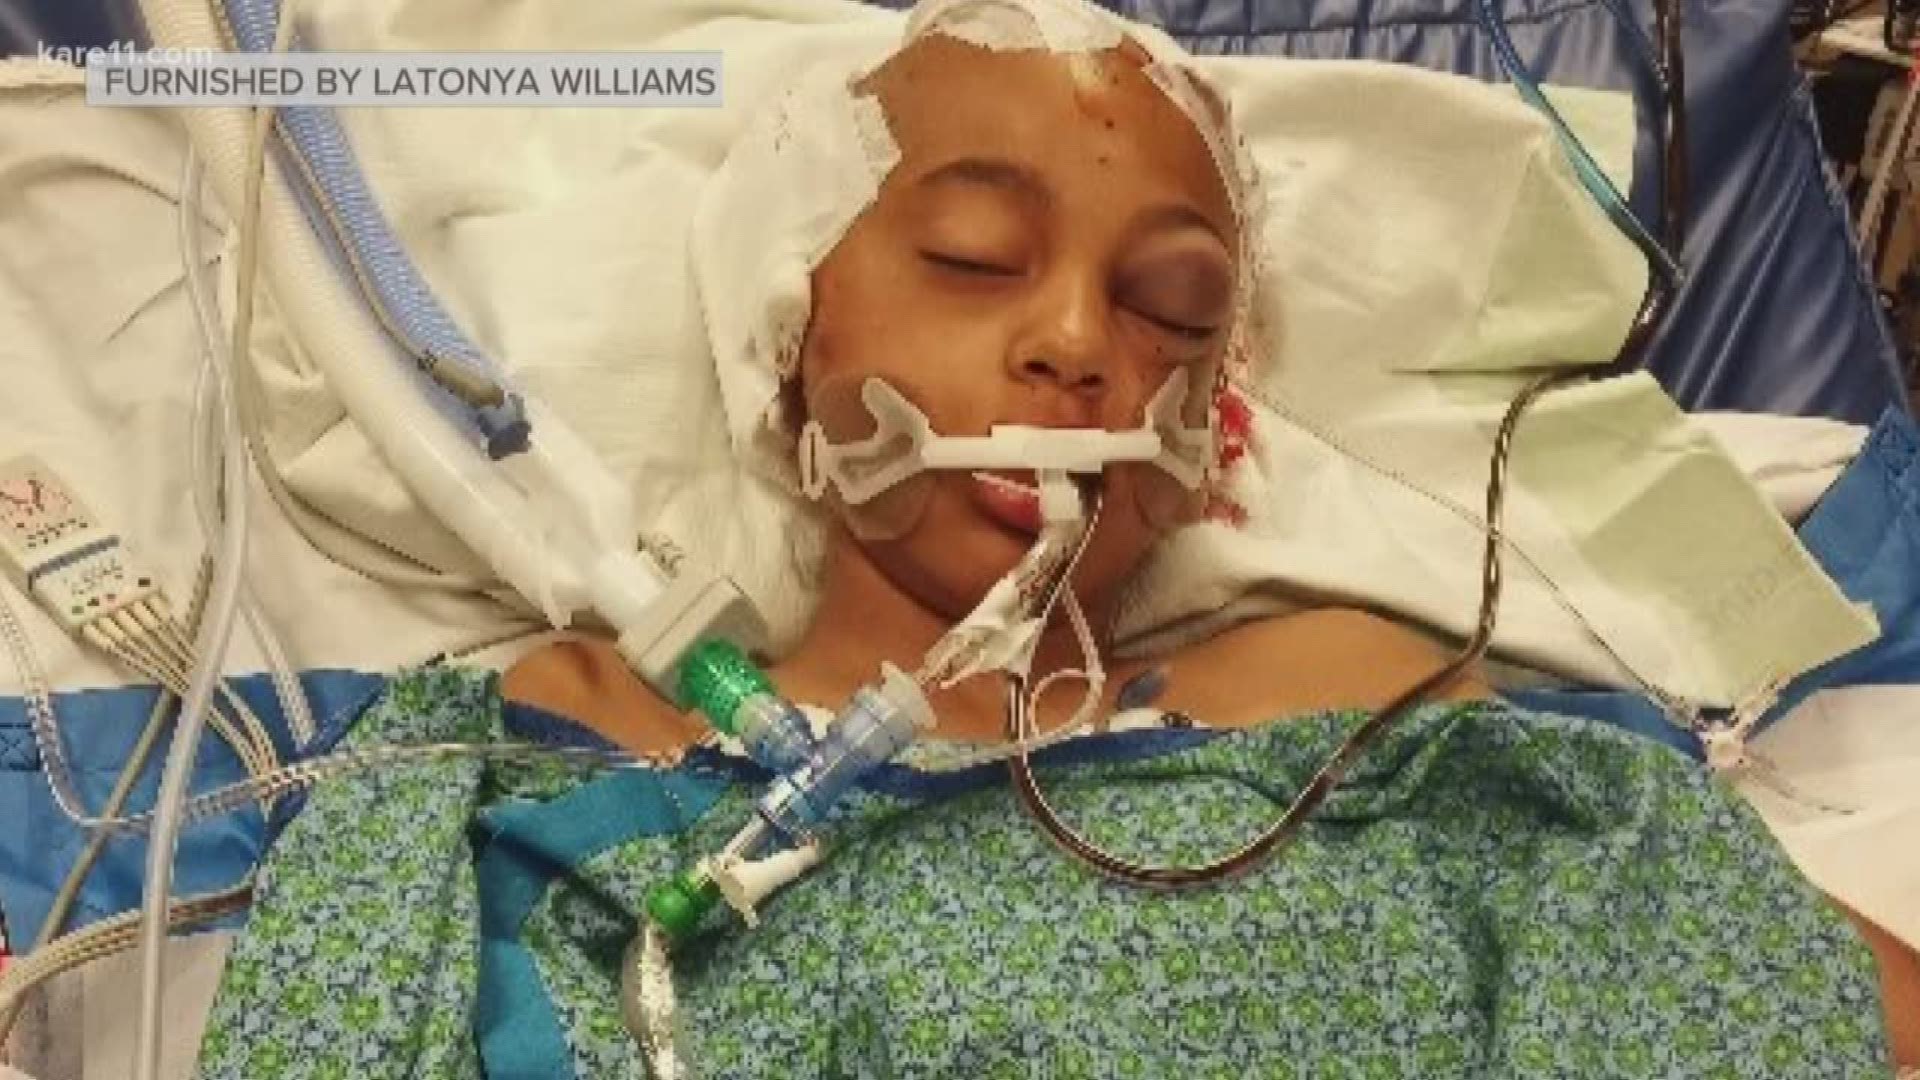 An 11-year-old is still in critical condition after she was hit by a car after getting off a school bus Friday afternoon. https://kare11.tv/2DP2FYc